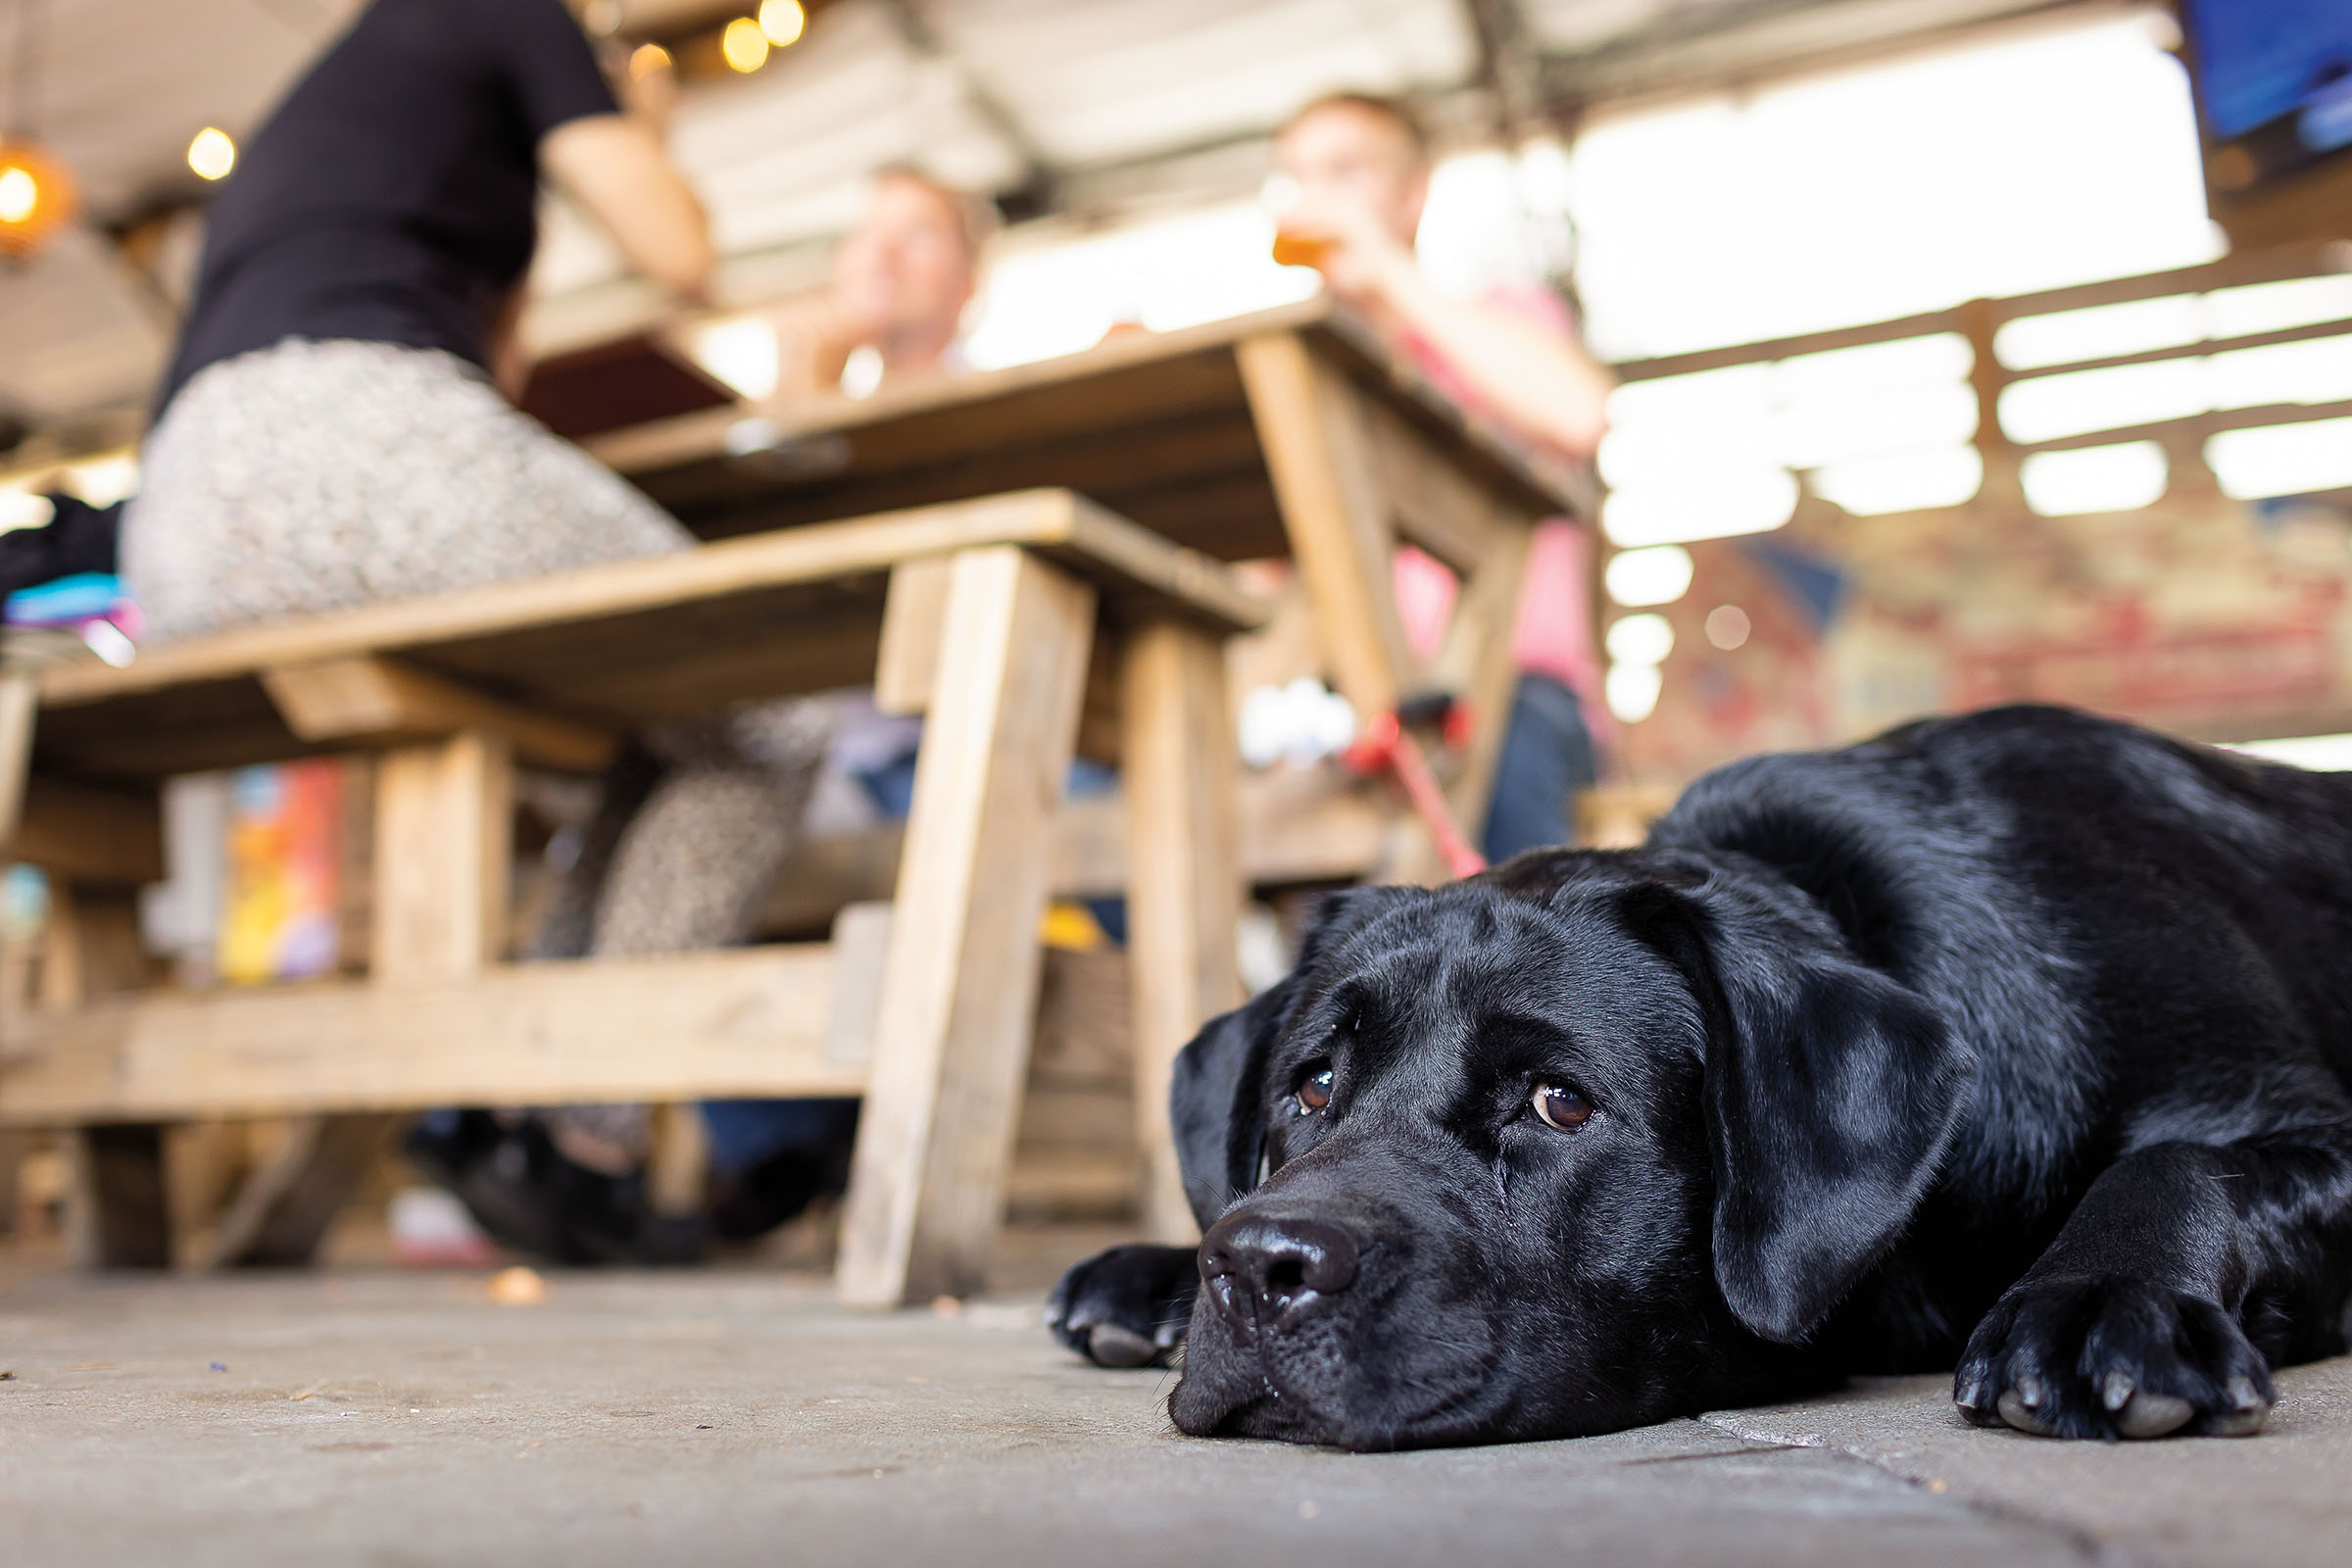 A black lab rests his head and snout on the ground next to a wooden picnic table